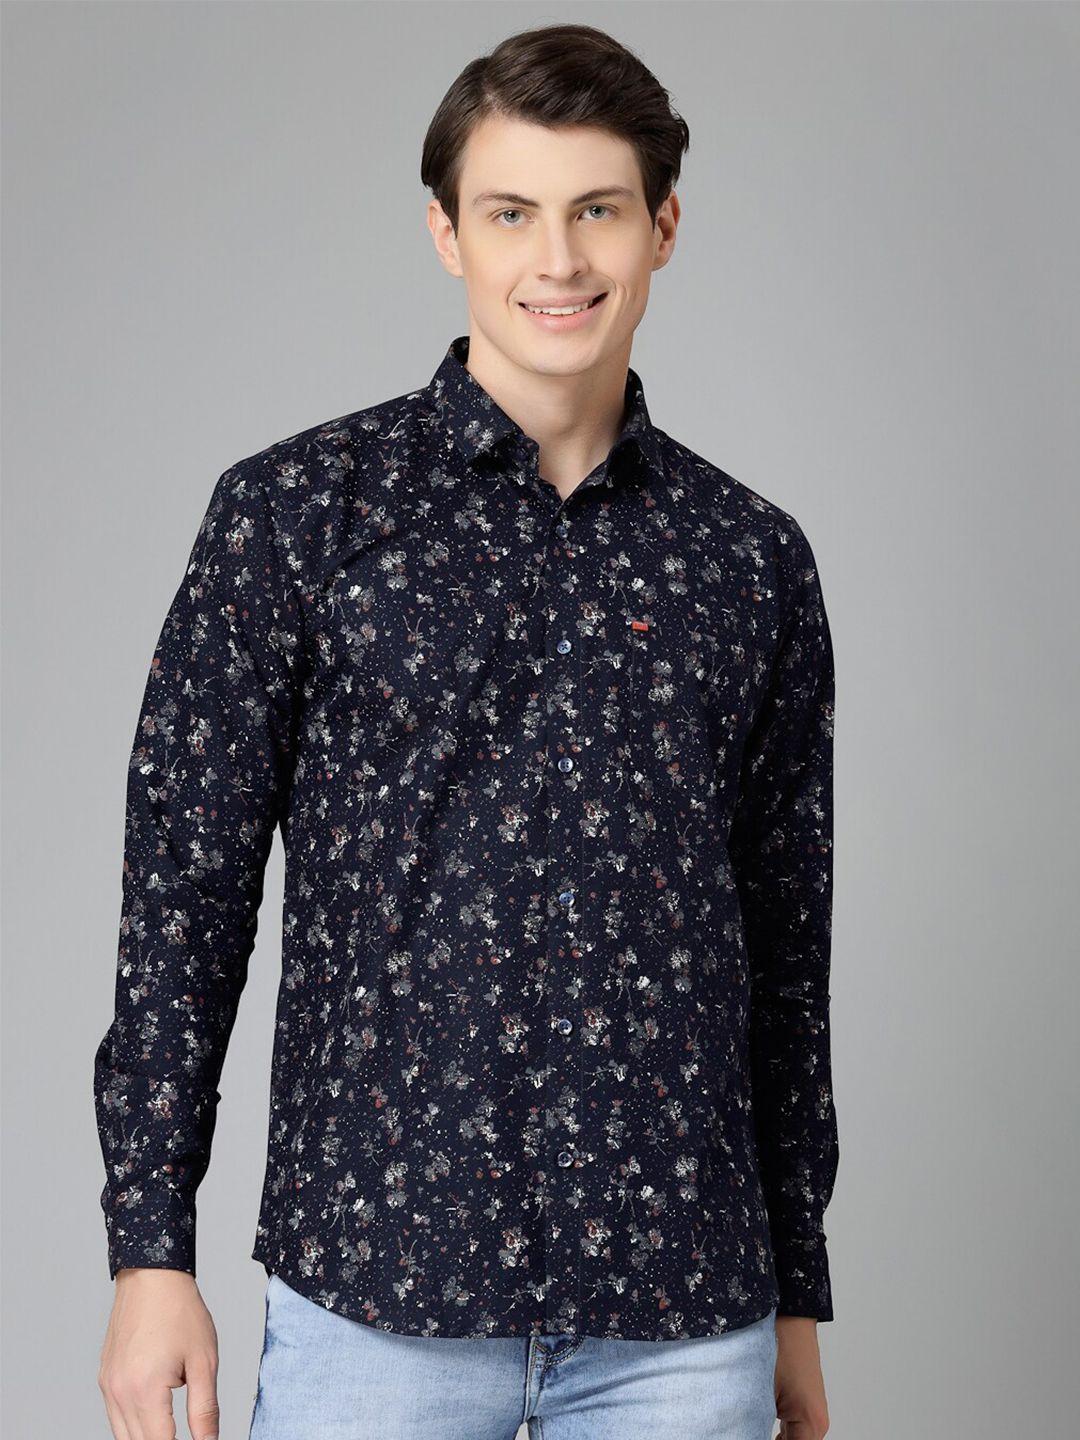 jadeberry standard floral printed spread collar cotton casual shirt